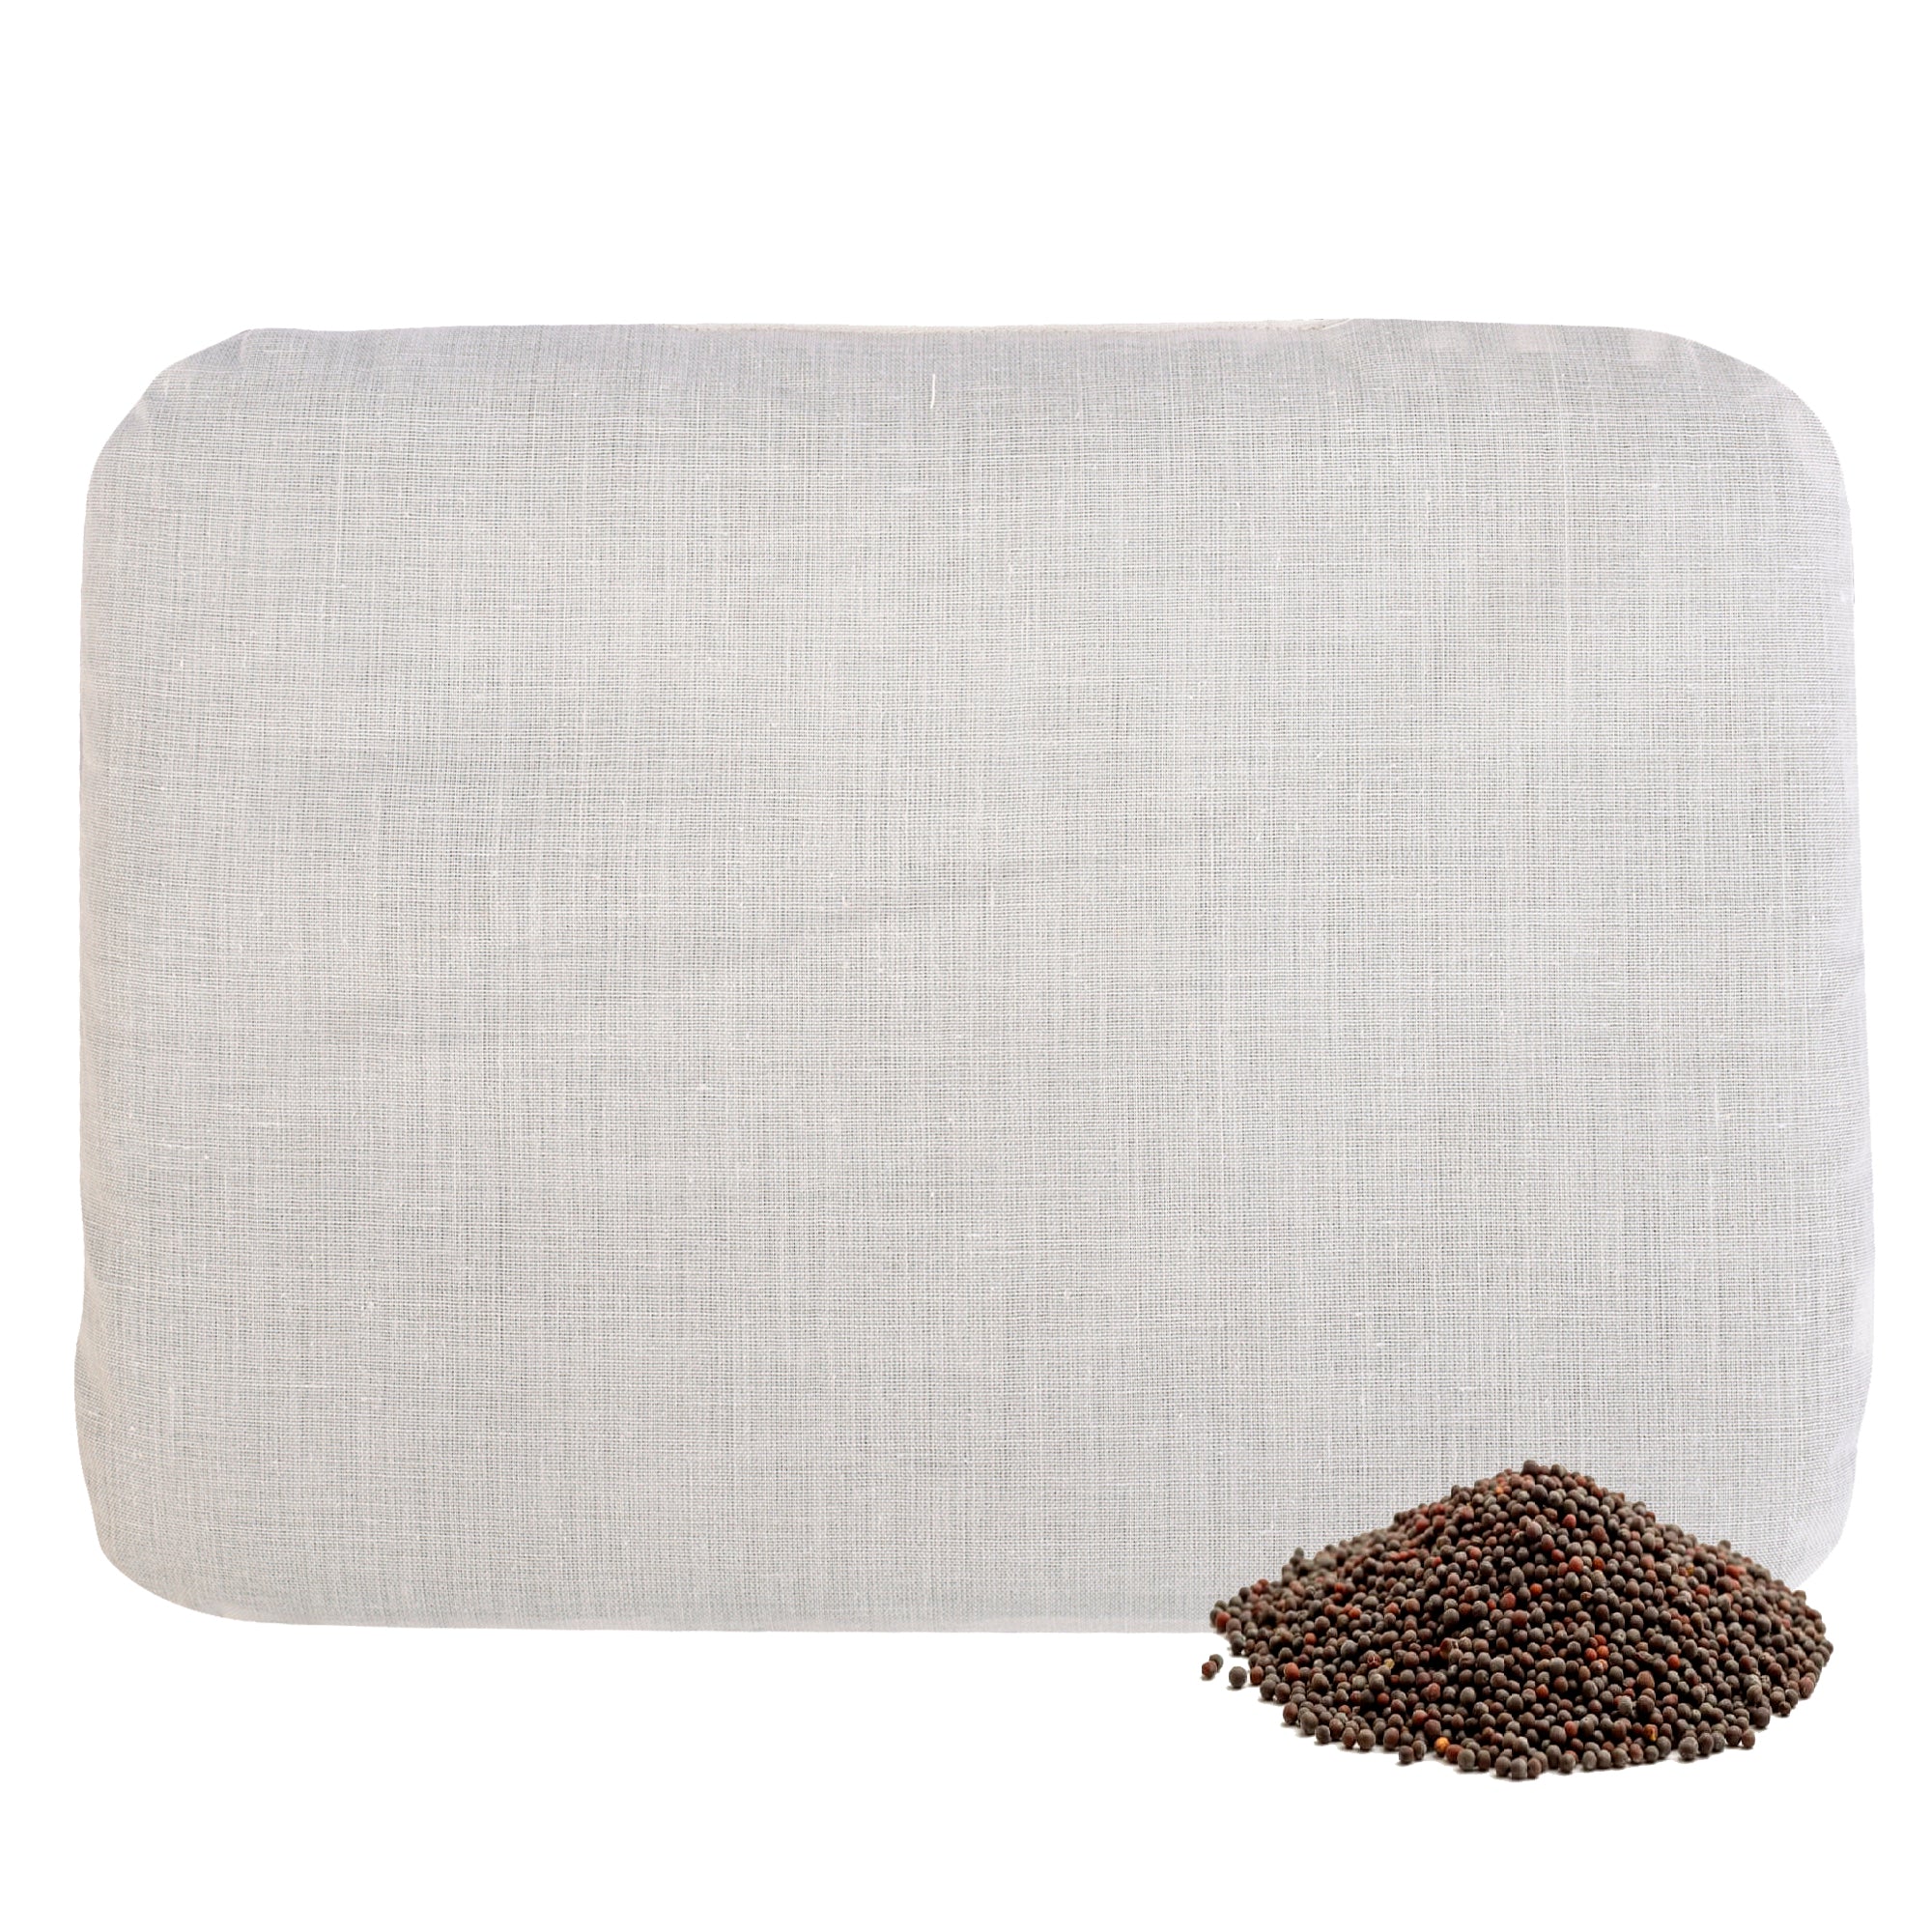 HARBOUR GREY CORAL MUSTARD PILLOW COVER AND FILLER SET